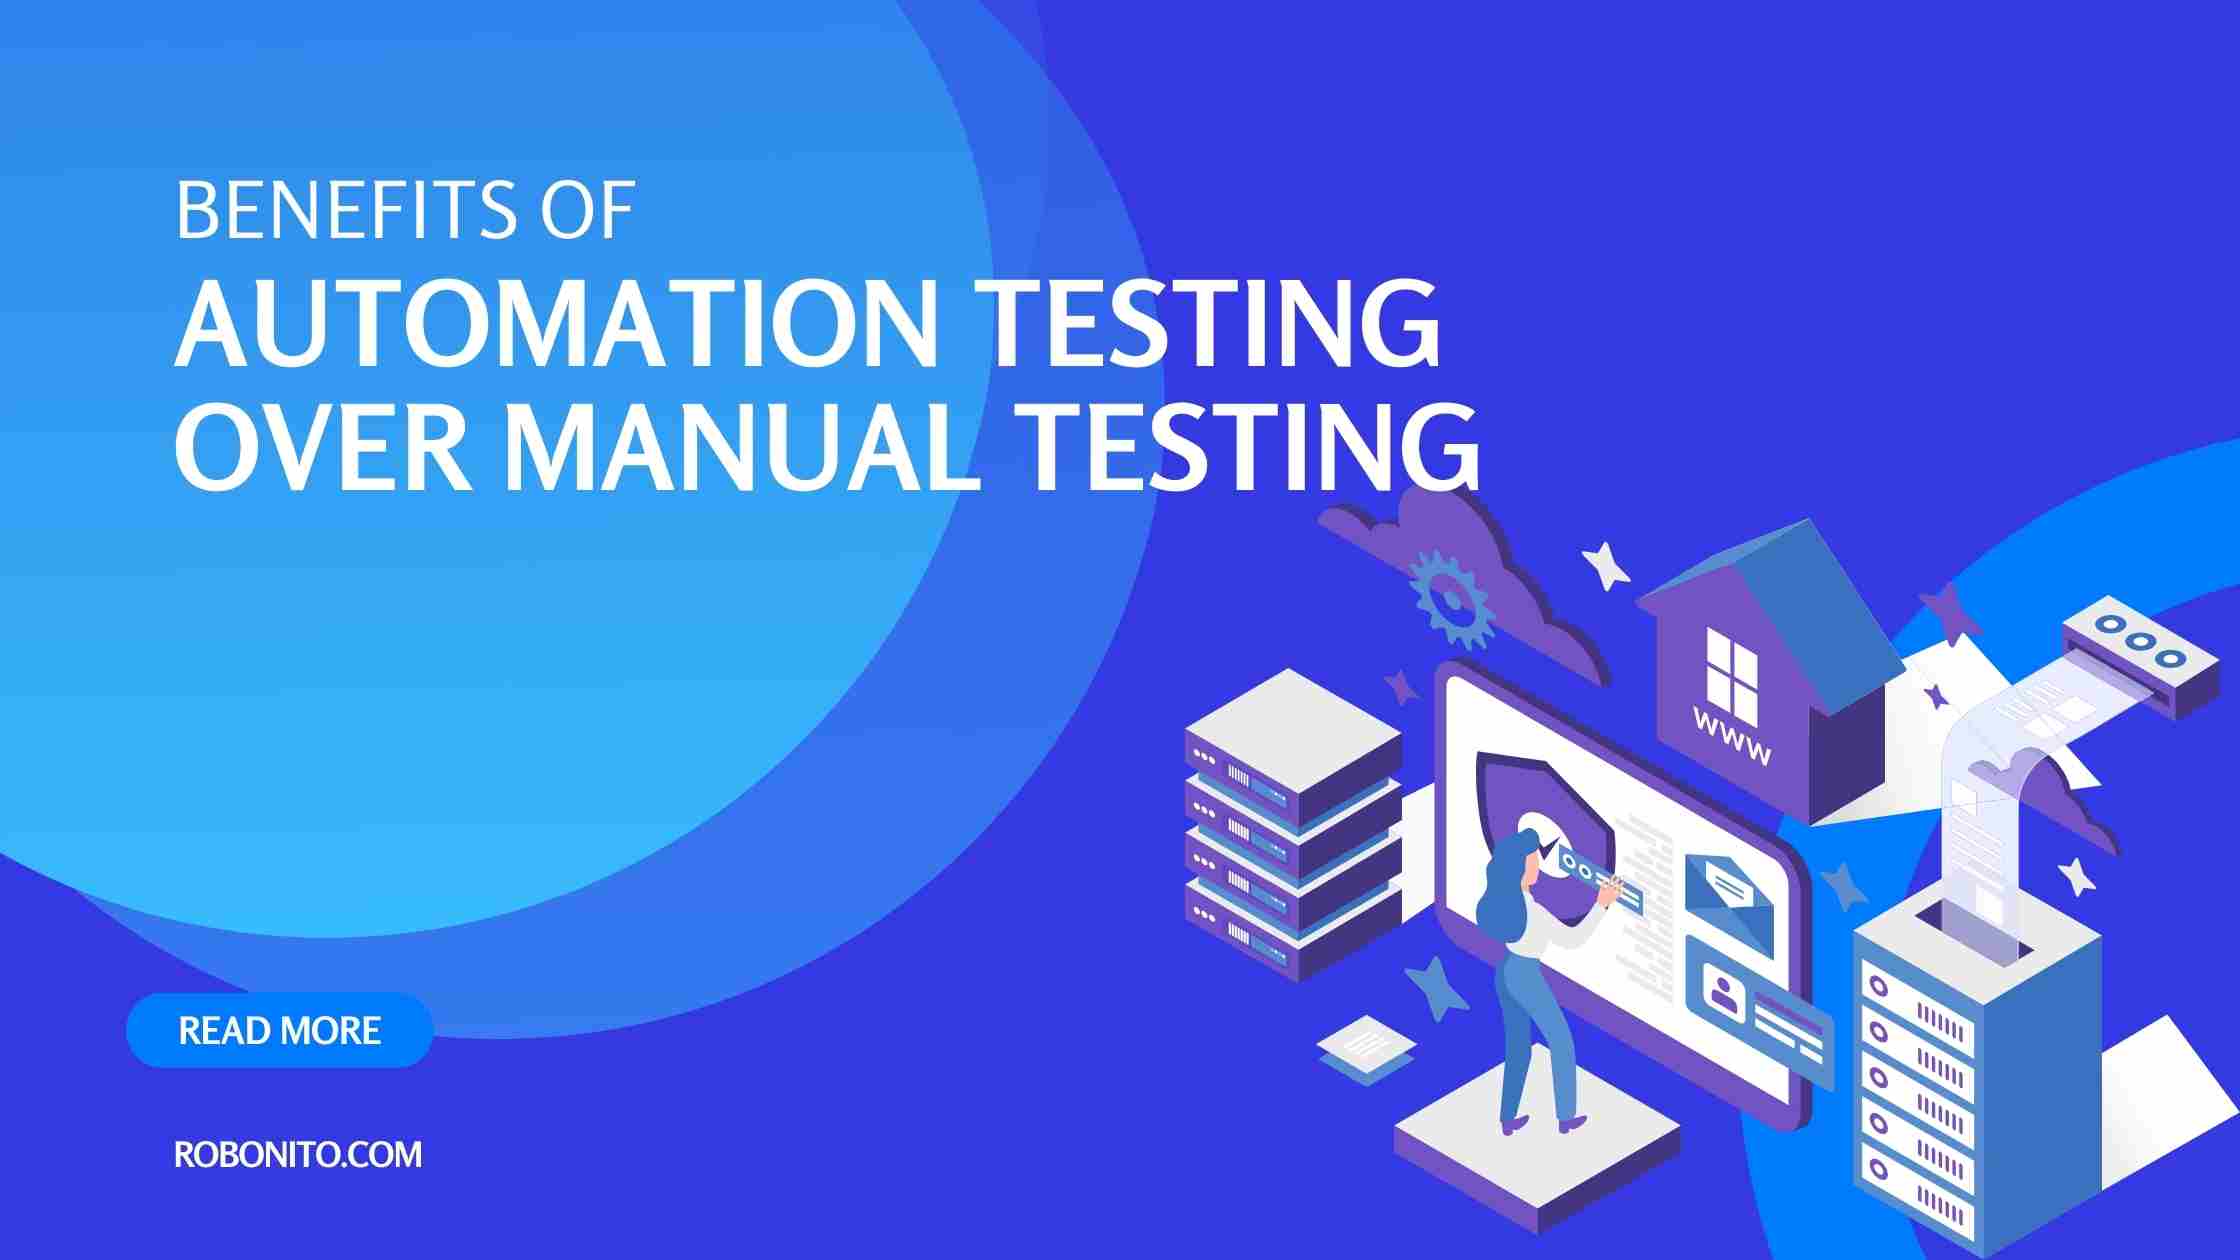 Benefits of Automation Testing Over Manual Testing